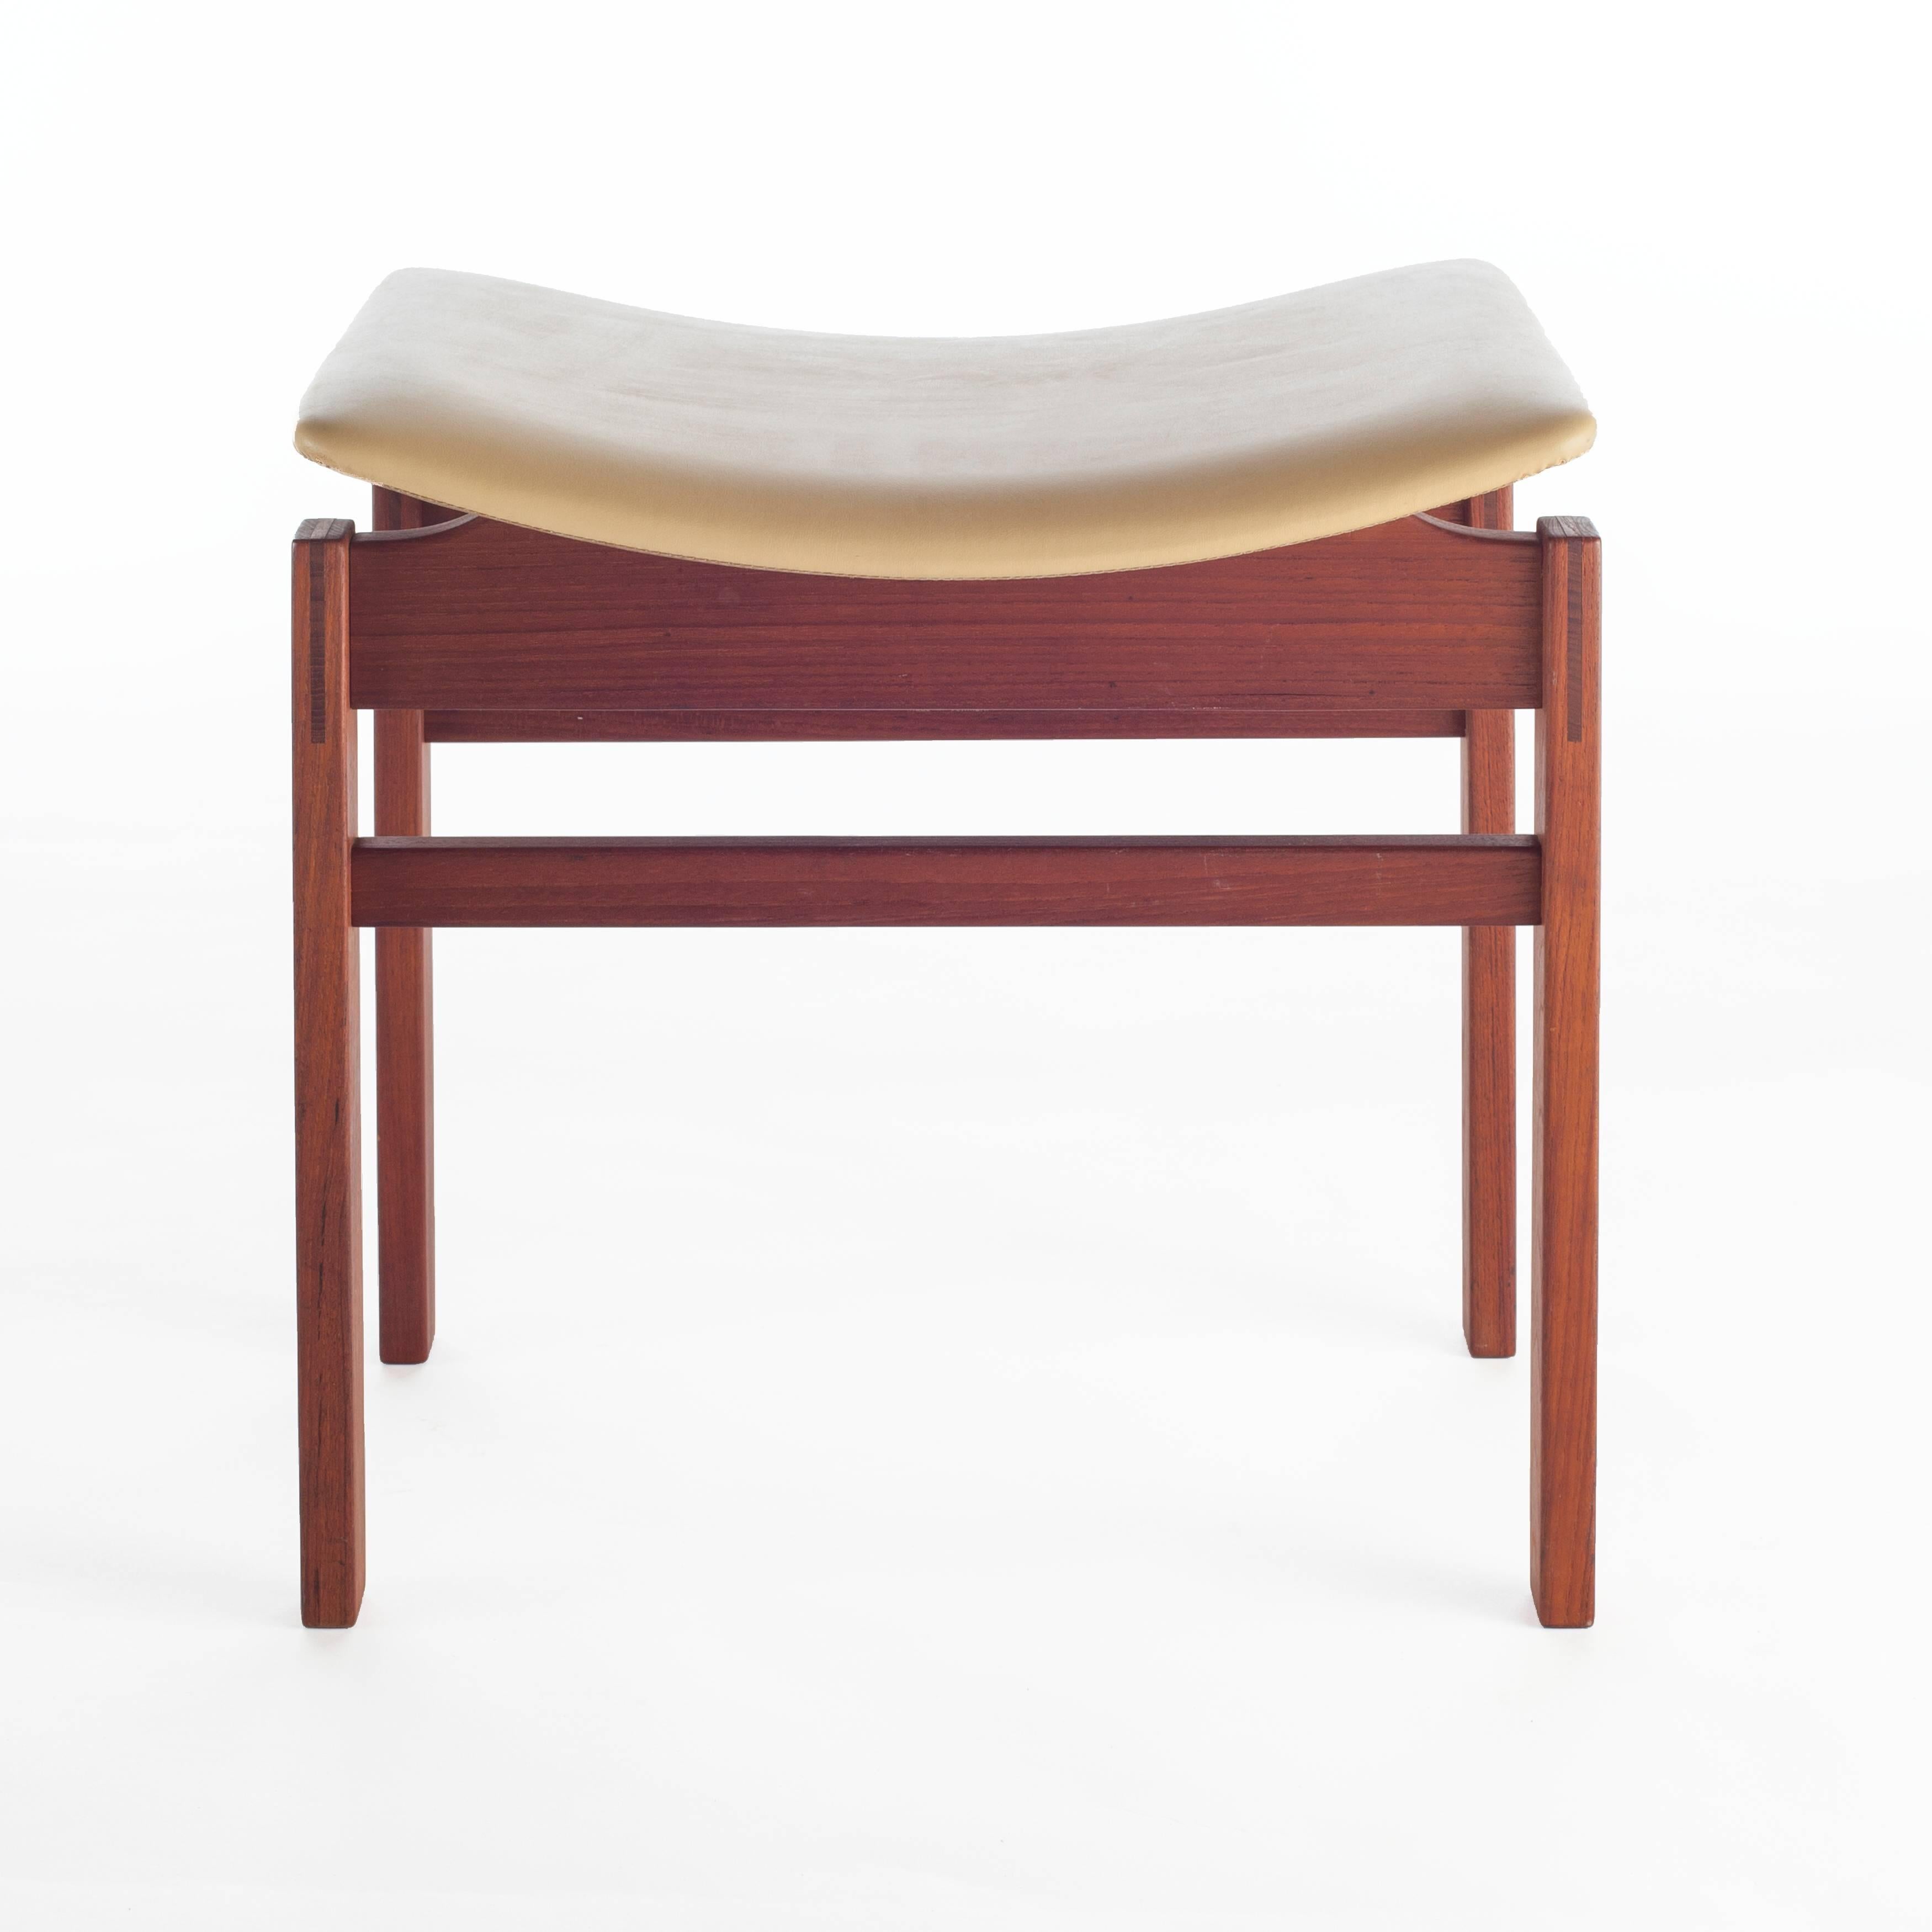 Lightweight yet sturdy, this versatile set of stools can be used in a variety of settings. The mustard-color leather on the curved seats contrast nicely with the rectangular lines and warm tones of the walnut frames. 

See these stools in our